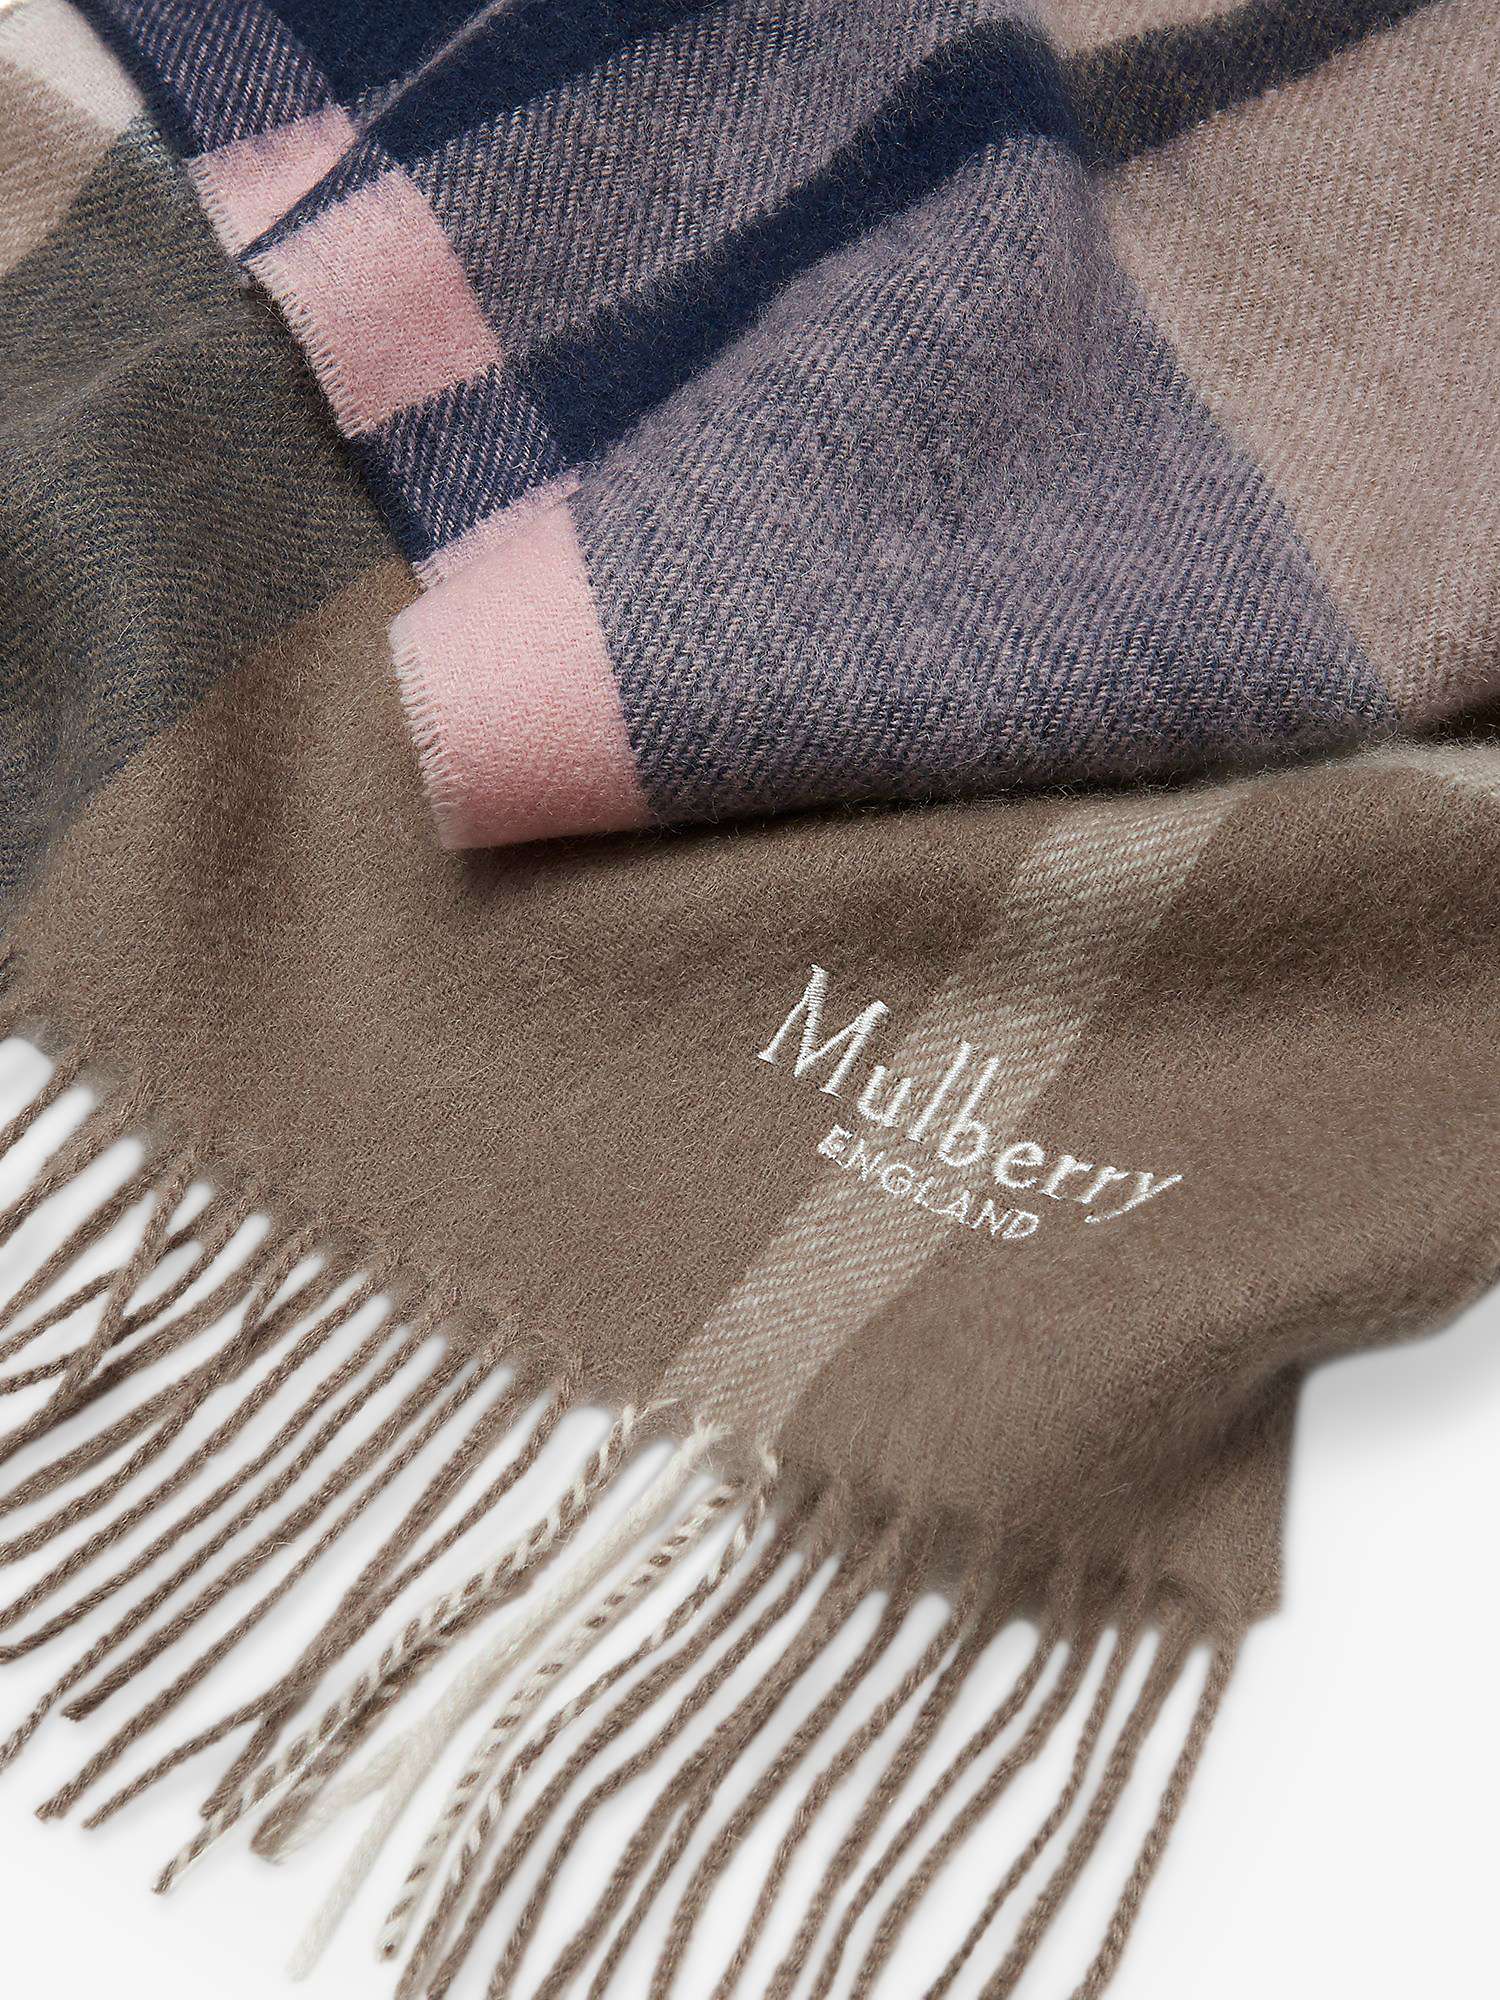 Buy Mulberry Small Check Lambswool Scarf Online at johnlewis.com